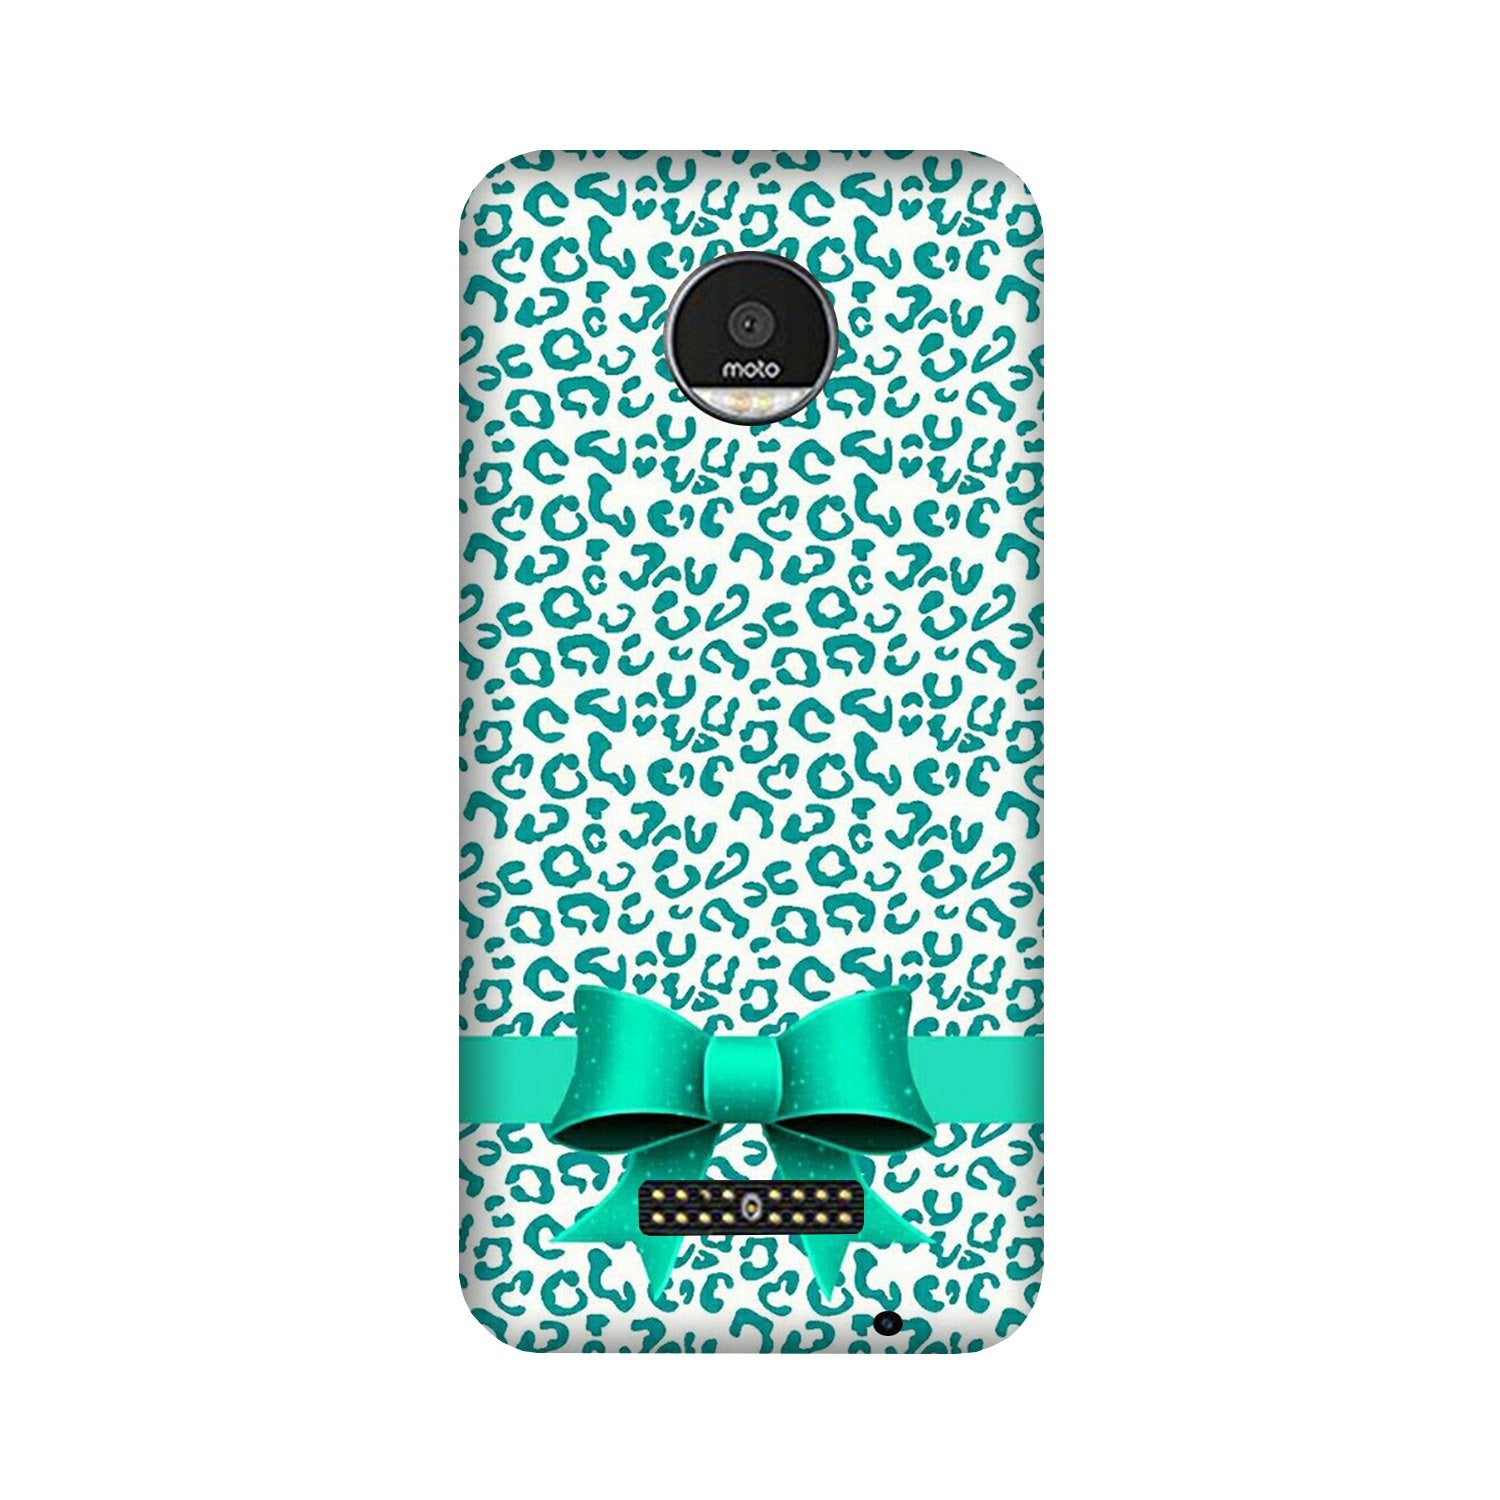 Gift Wrap6 Case for Moto Z2 Play